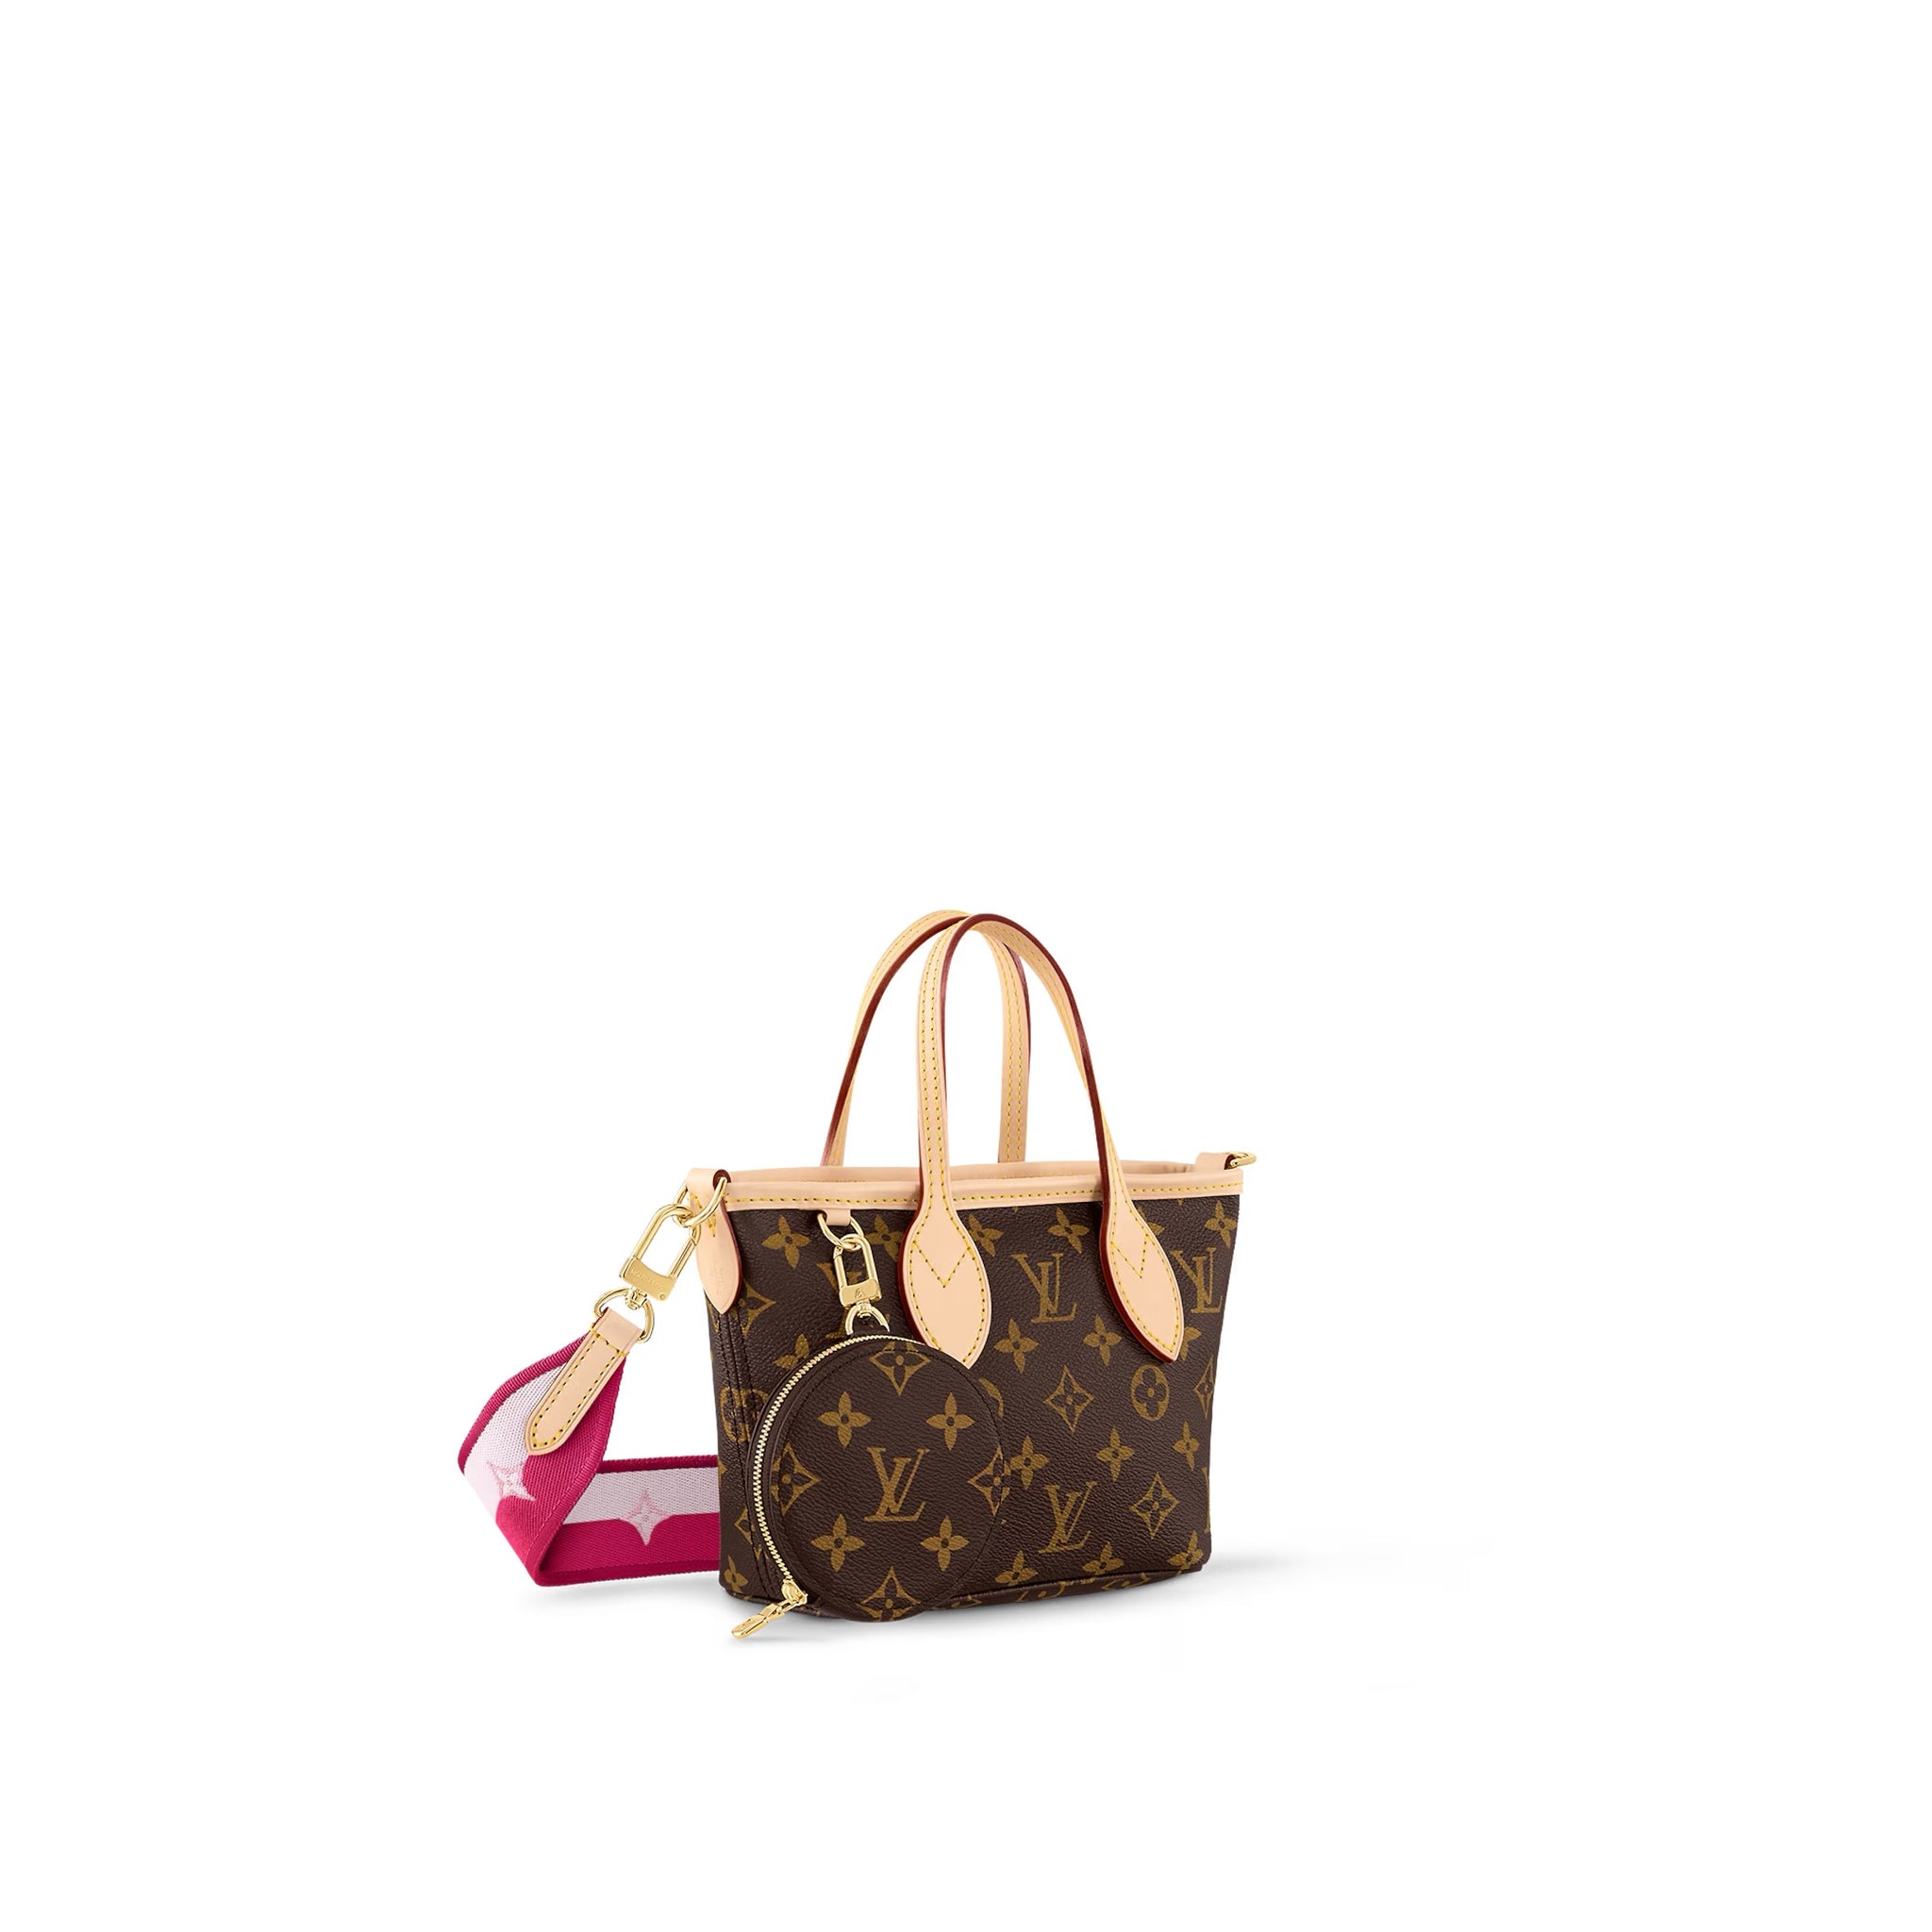 Neverfull MM Tote Bag - Luxury Other Monogram Canvas Blue